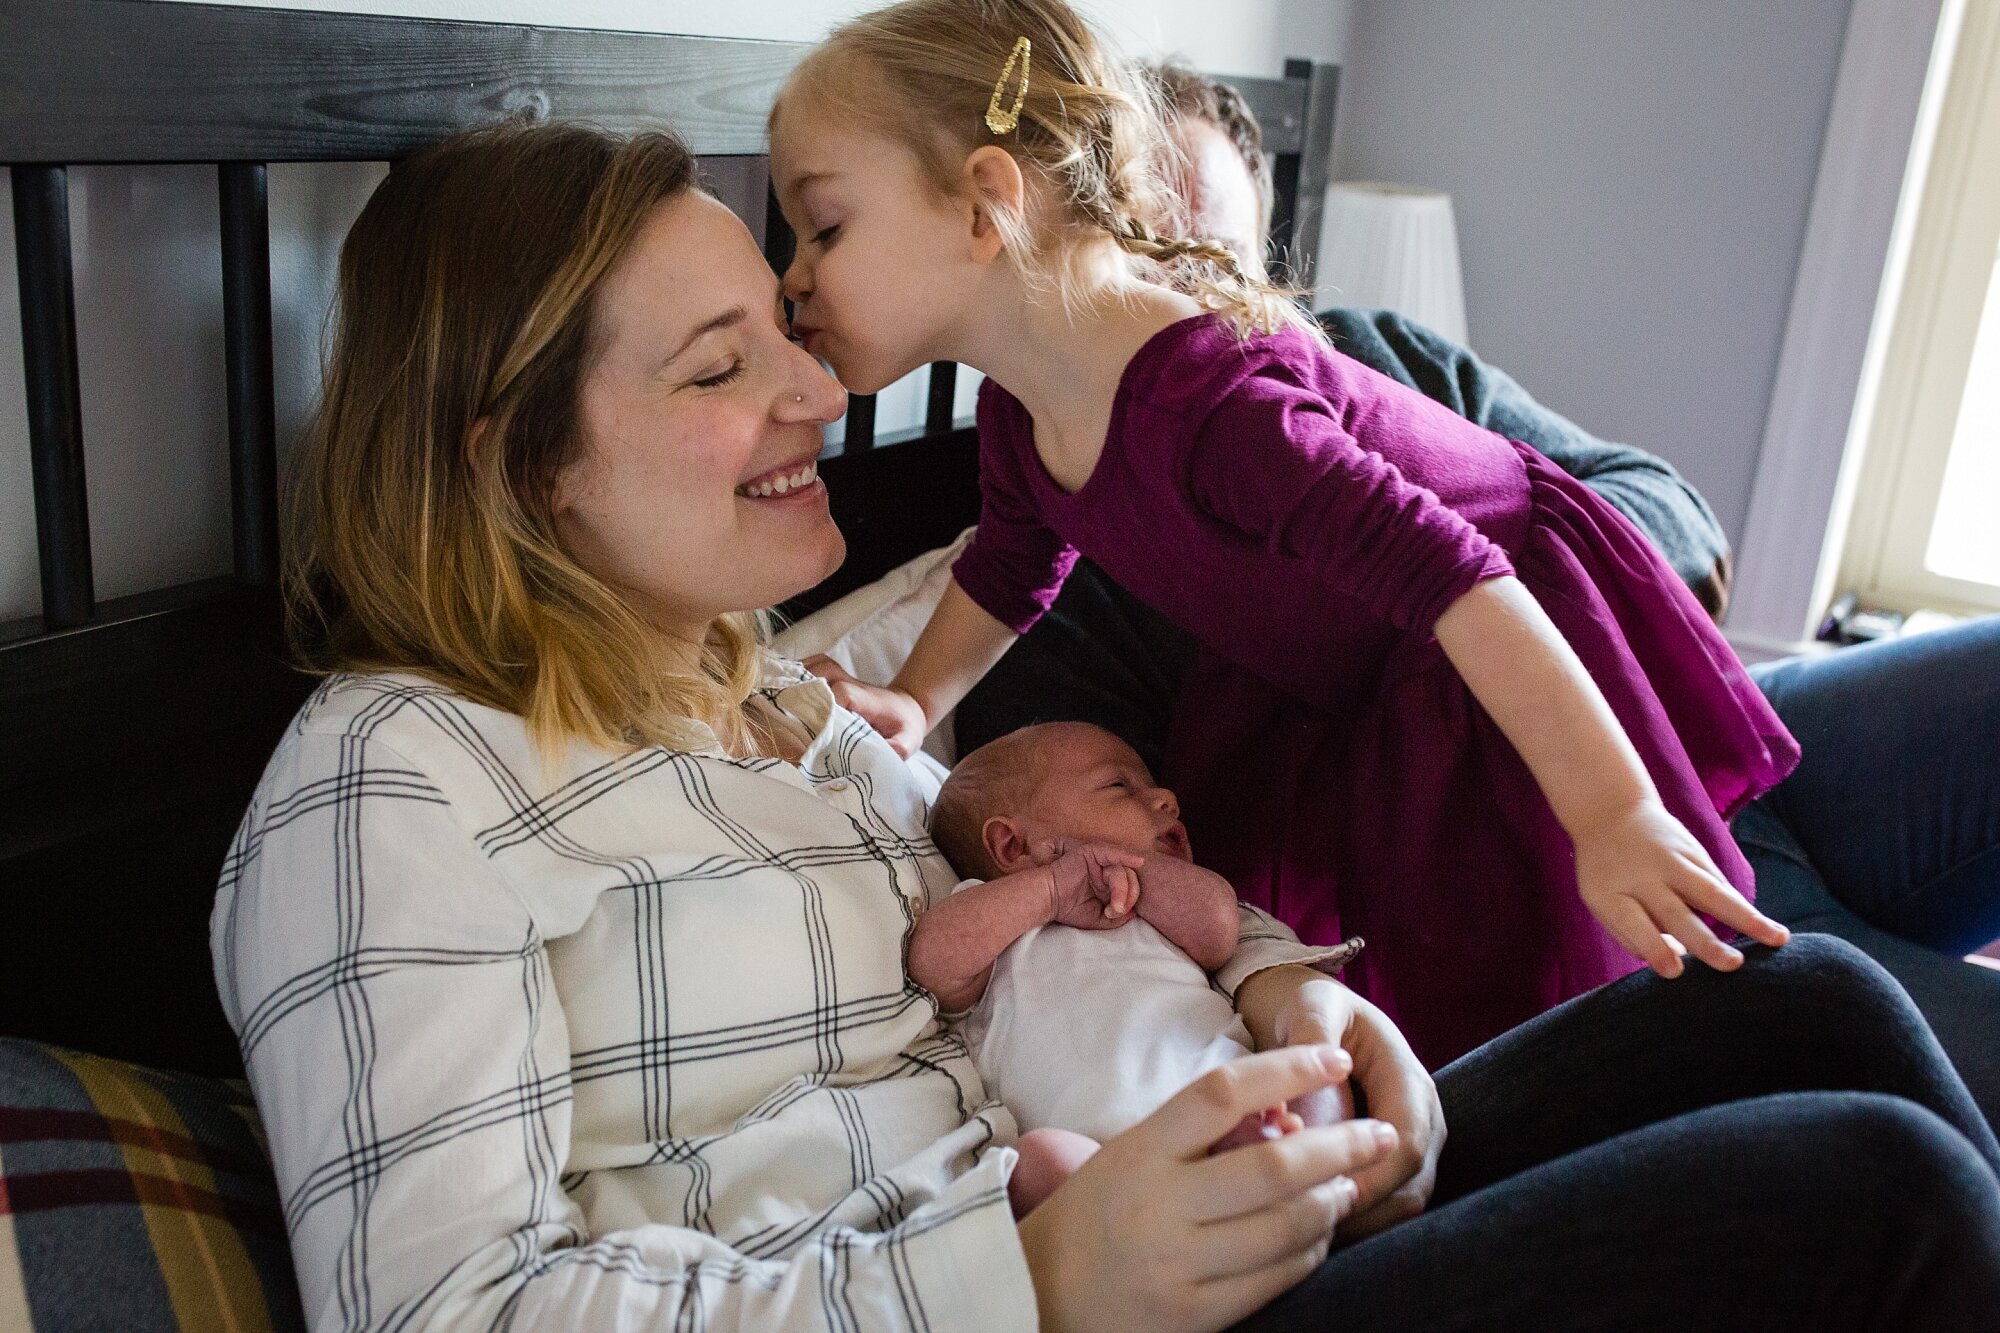 Big sister gives mom a kiss while she holds baby brother, Philadelphia family photographer